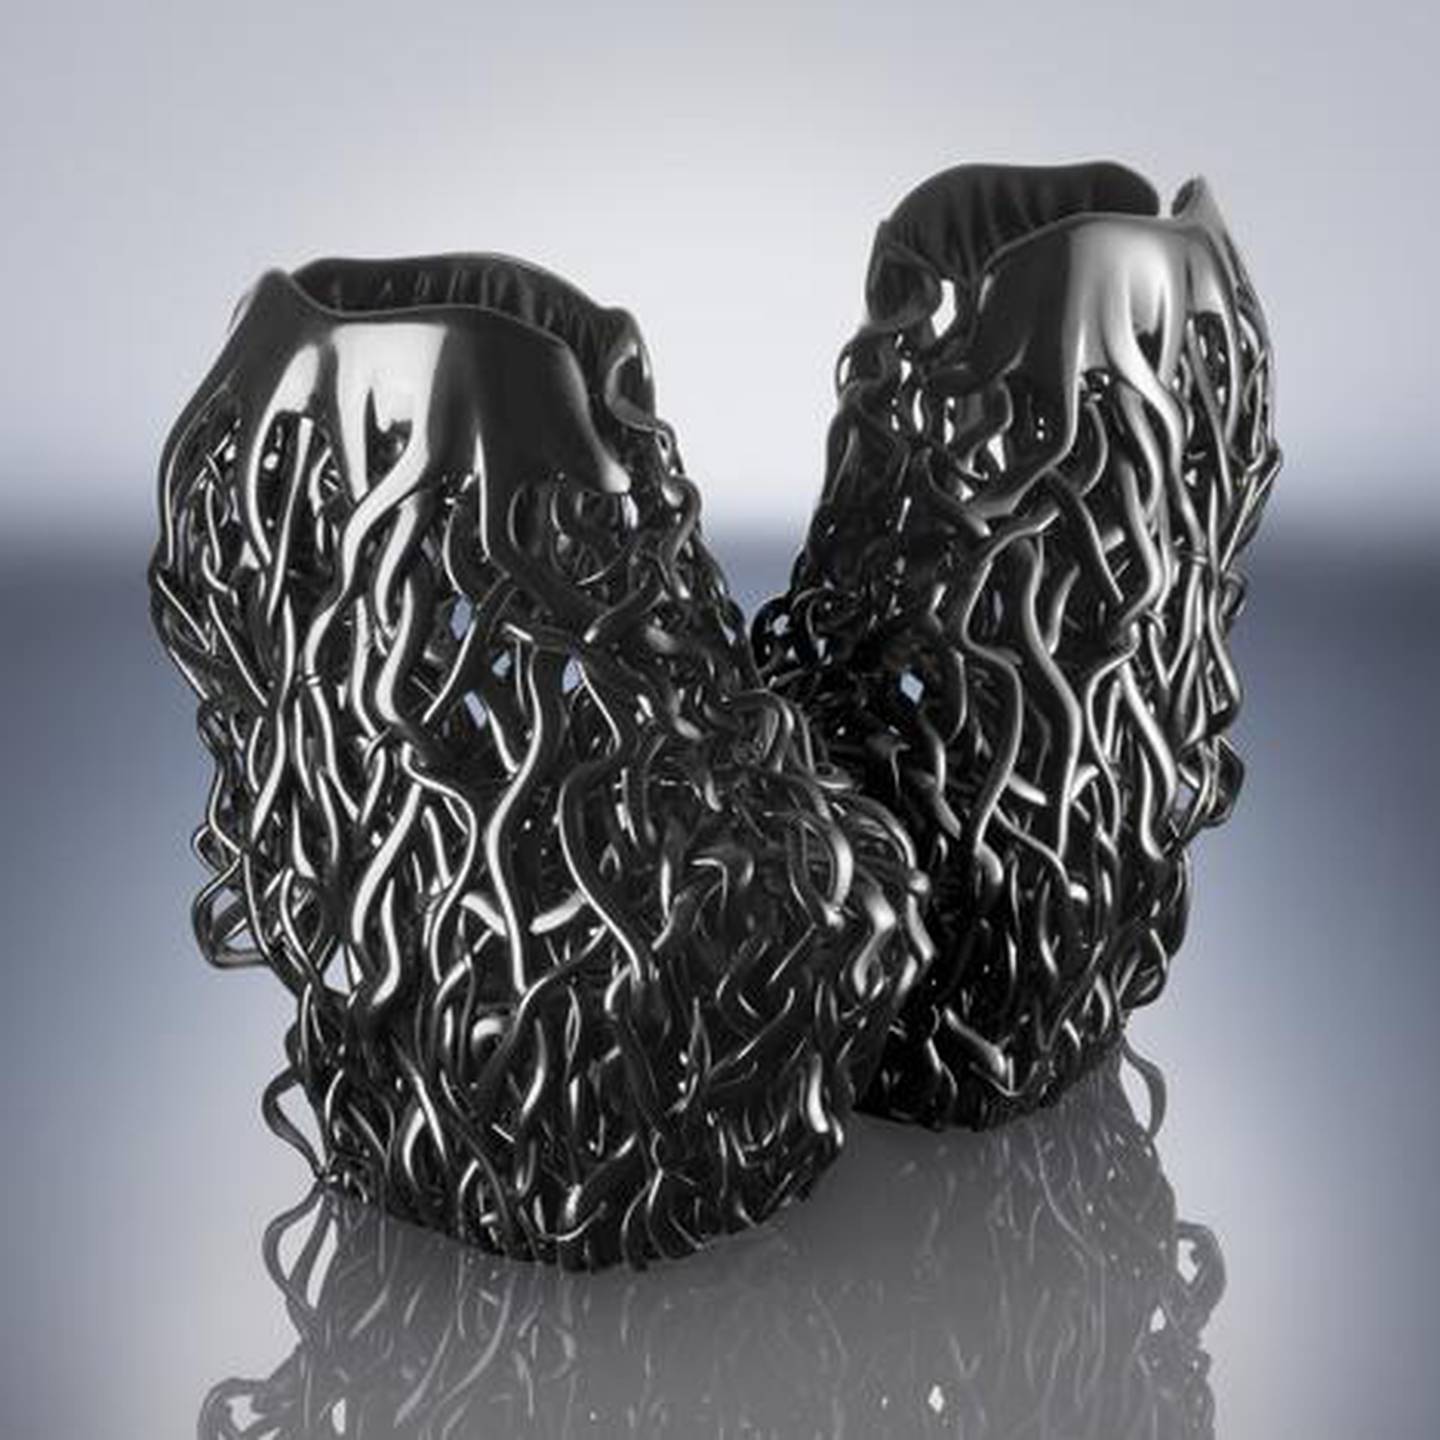 A 3D-printed shoe created by United Nude for designer Iris Van Herpen's runway show in 2013. Courtesy United Nude